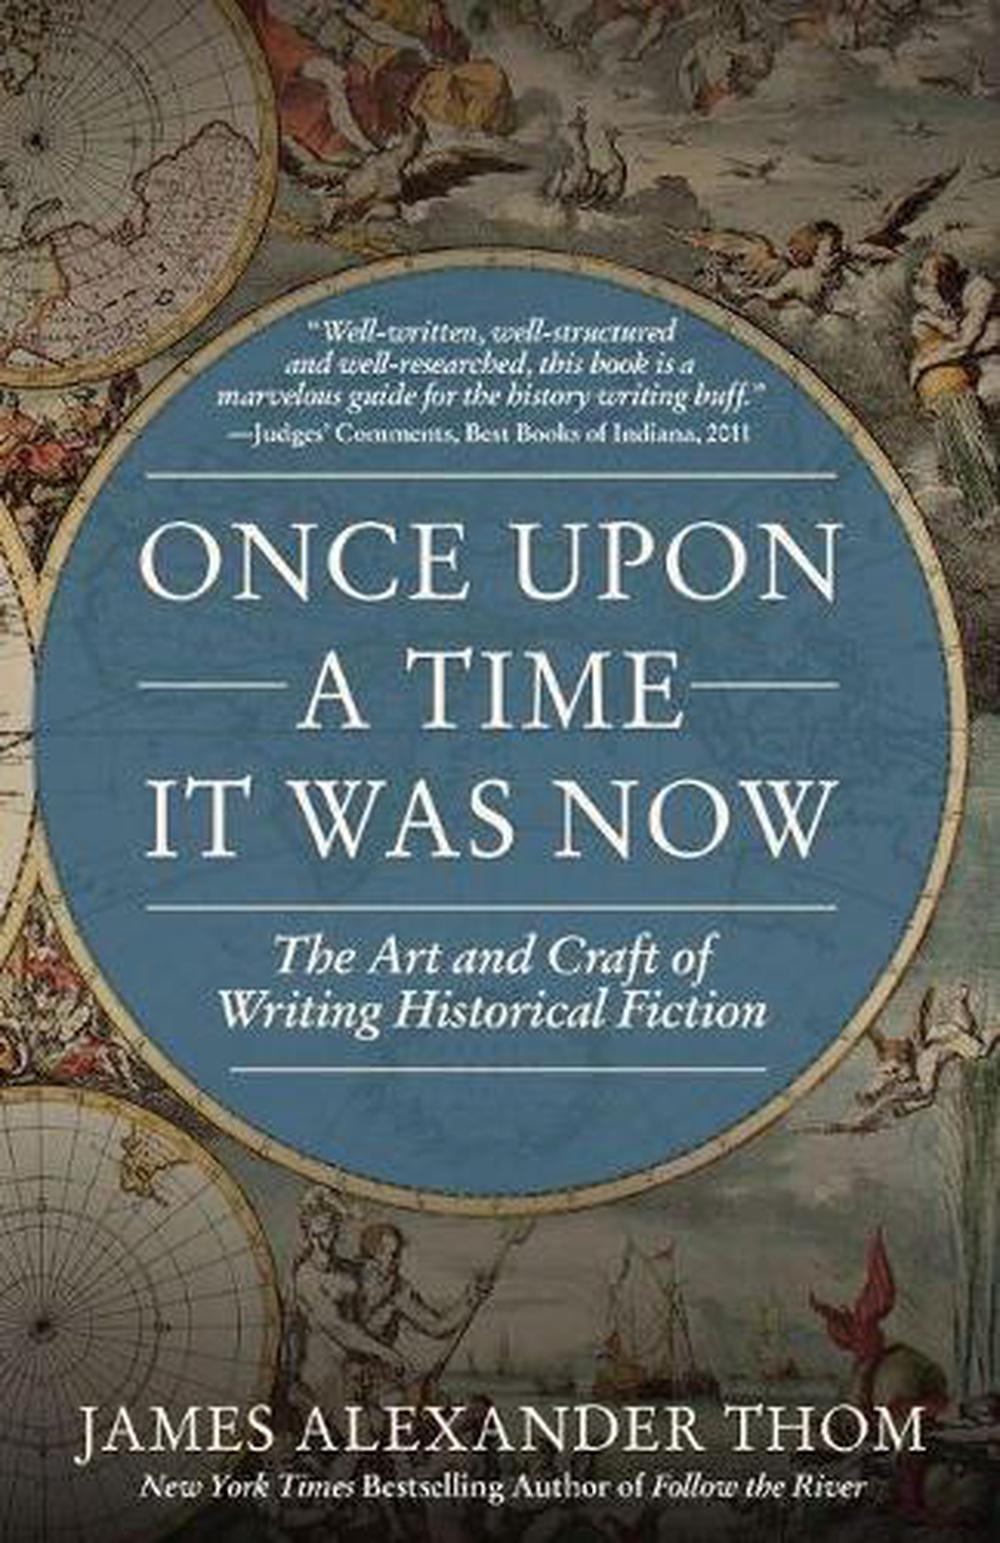 The Art and Craft of Writing Historical Fiction by James Alexander Thom